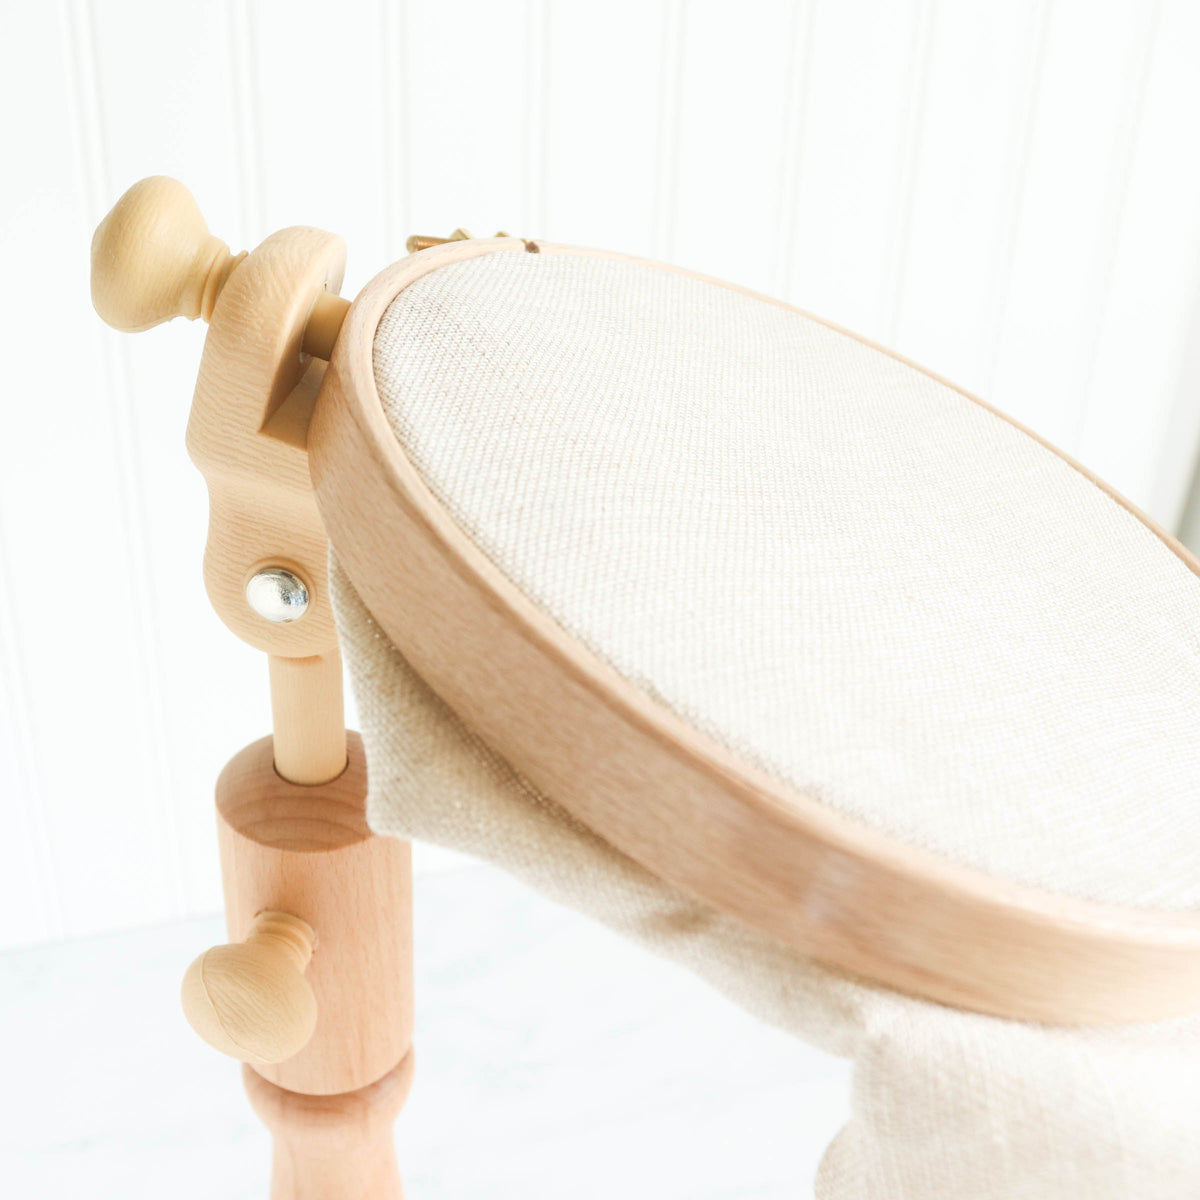 Adjustable Embroidery Hoop Seat Stand